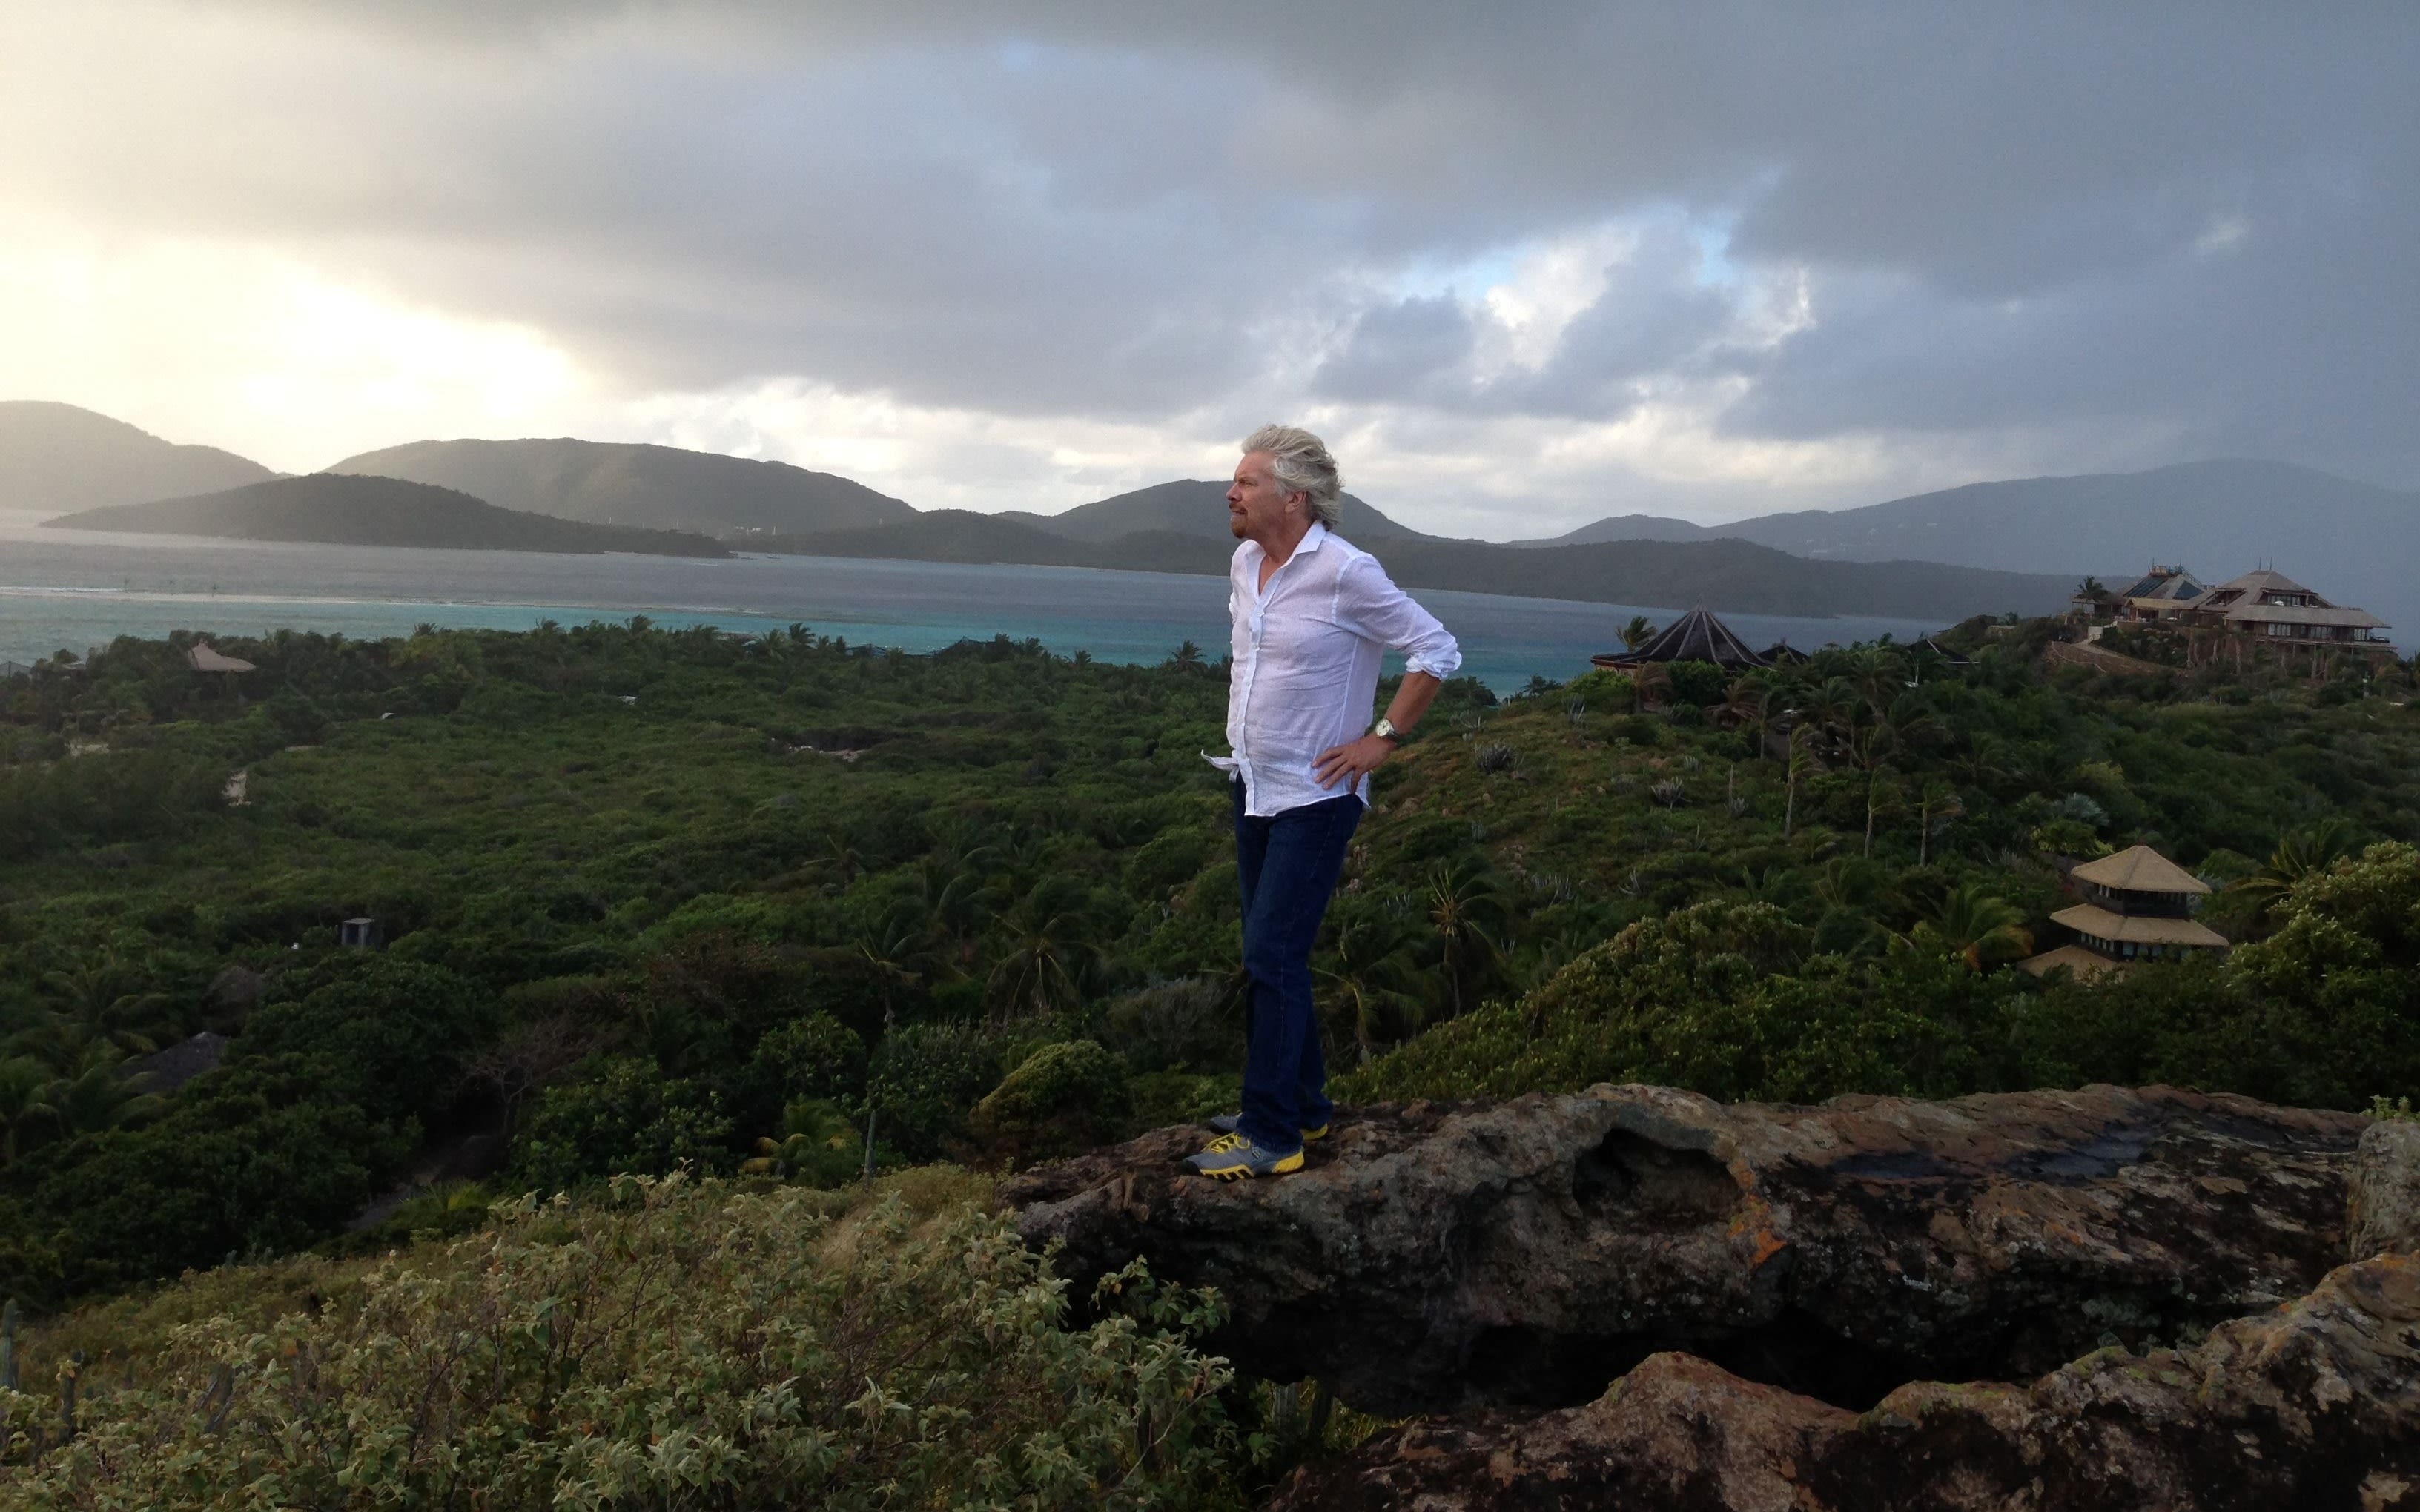 Richard Branson on hills looking at the views